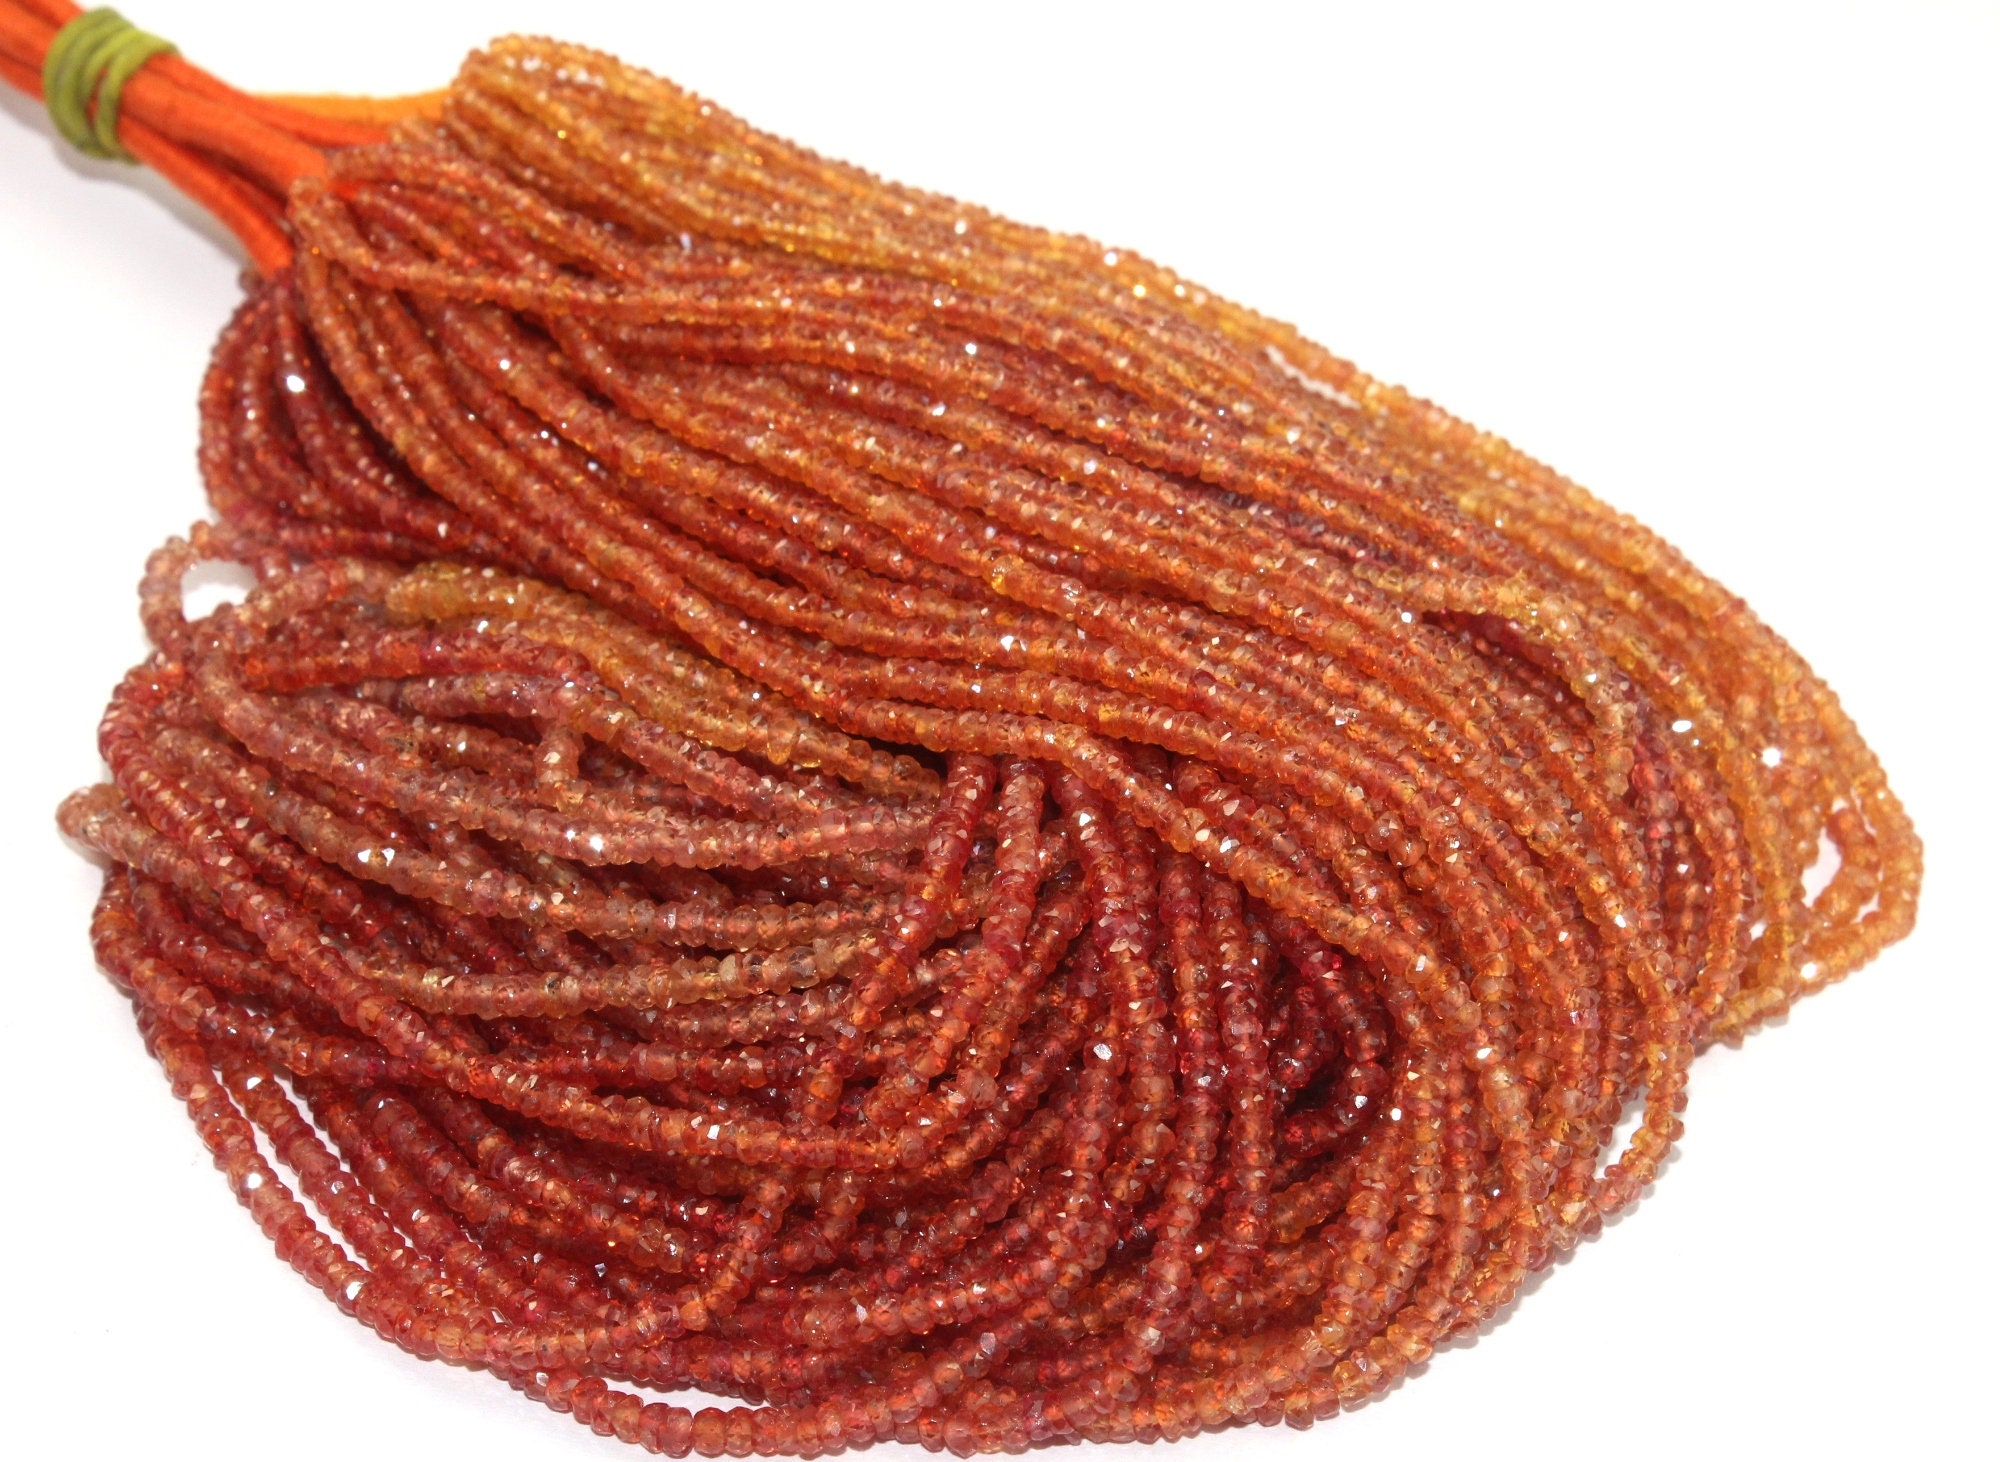 19 3 - 3.5mm Natural Orange Songea Sapphire Micro Faceted Rondelle Beads Semiprecious Gemstone Diy Jewelry Making Wire Wrapping